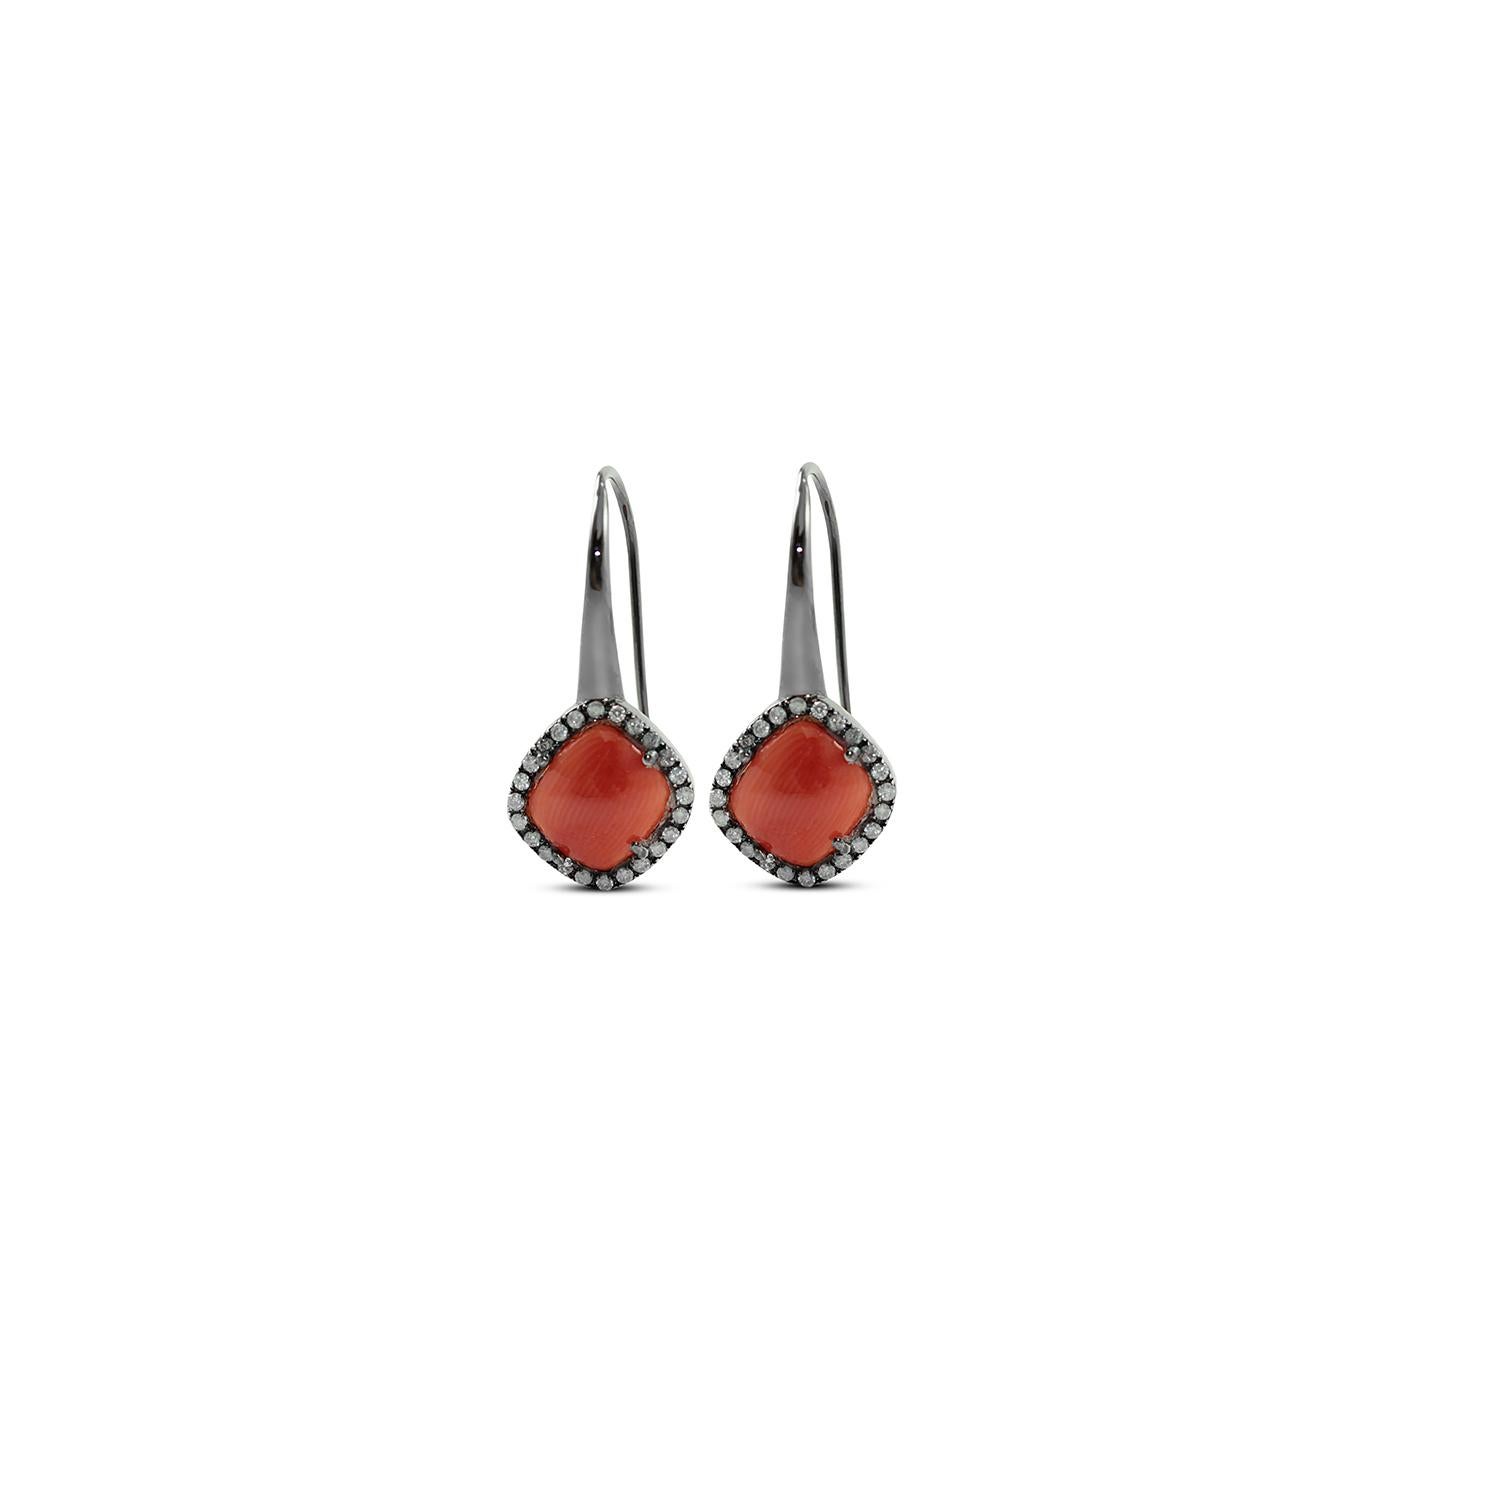 Nice earrings in 18kt black gold, ice diamonds and coral cabochons. 
Gold g. 3,84
Ice diamonds ct. 0,38
Mediterranean Coral (Corallium rubrum) 